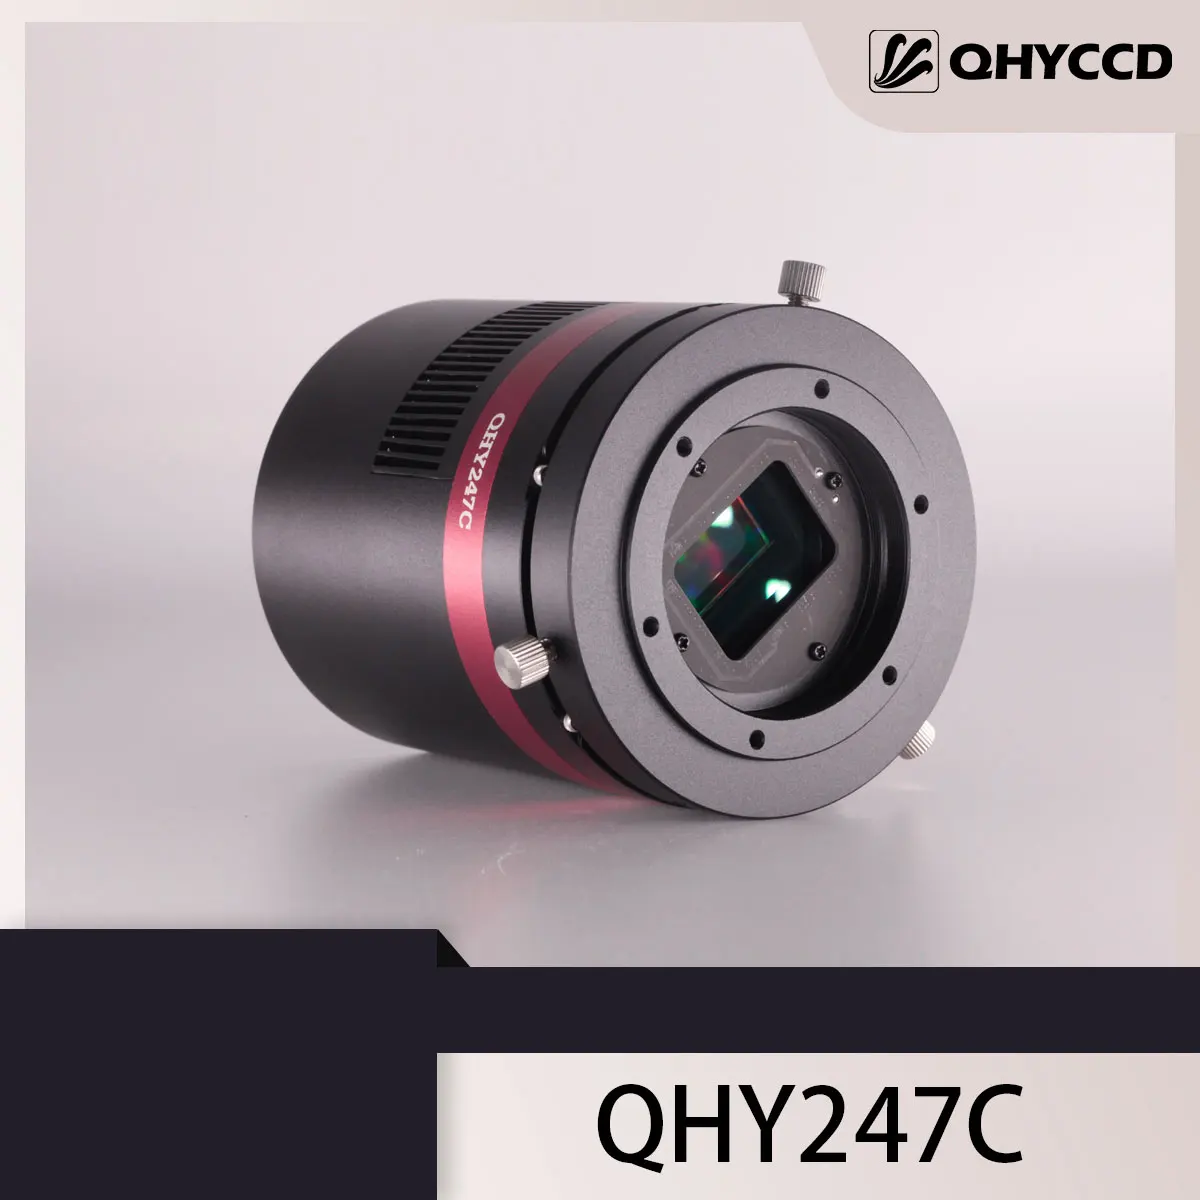 

QHYCCD QHY247C APS-C format 24 million astrophotography color cooling CMOS camera